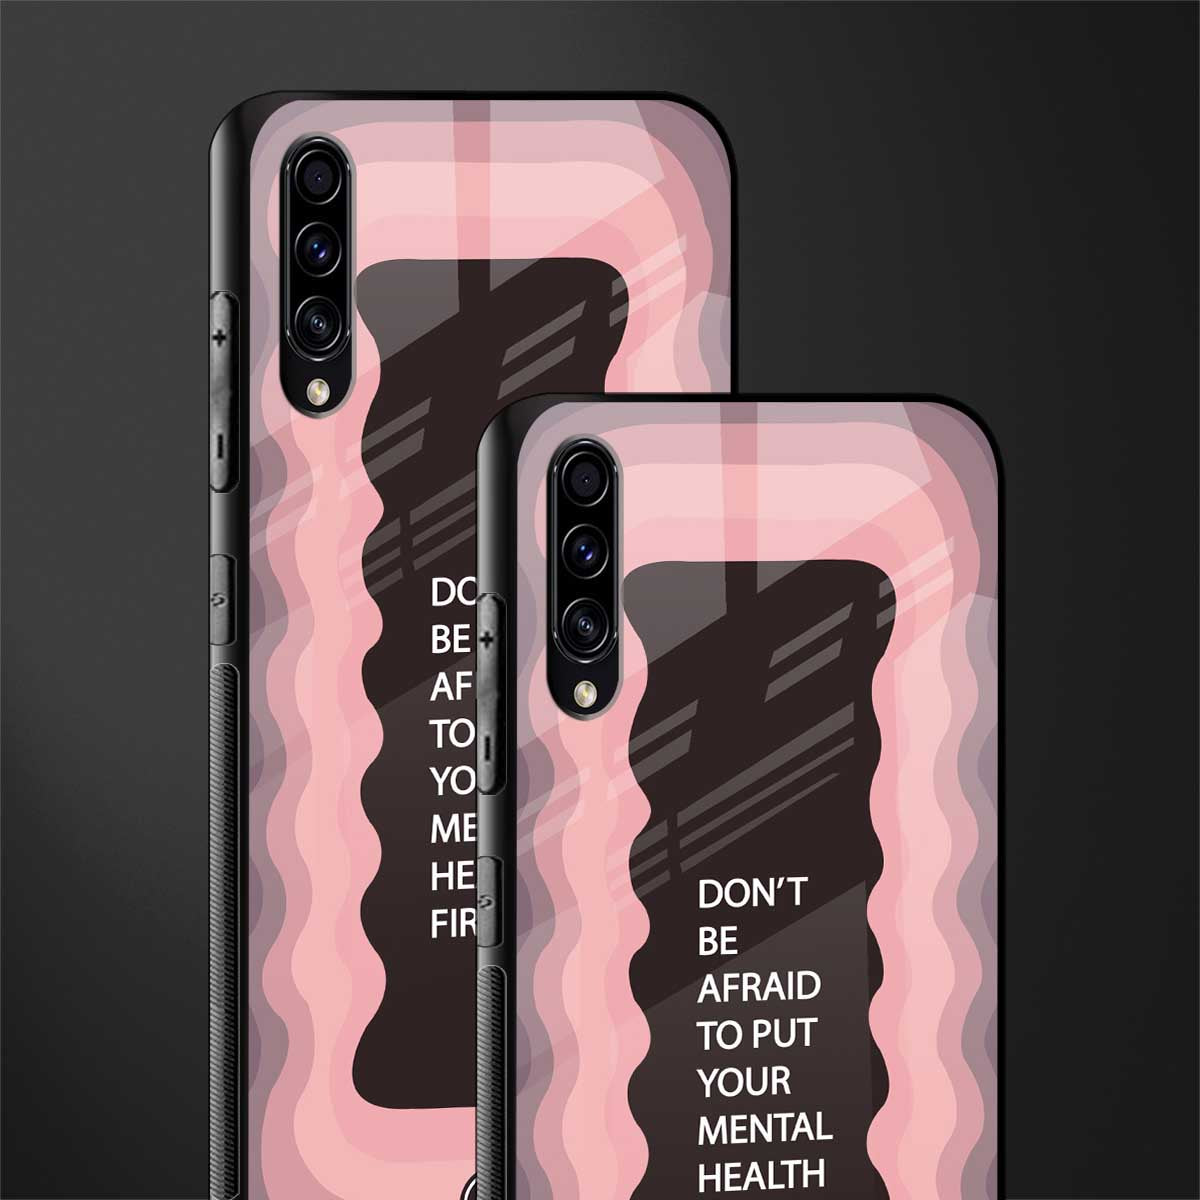 mental health first glass case for samsung galaxy a50